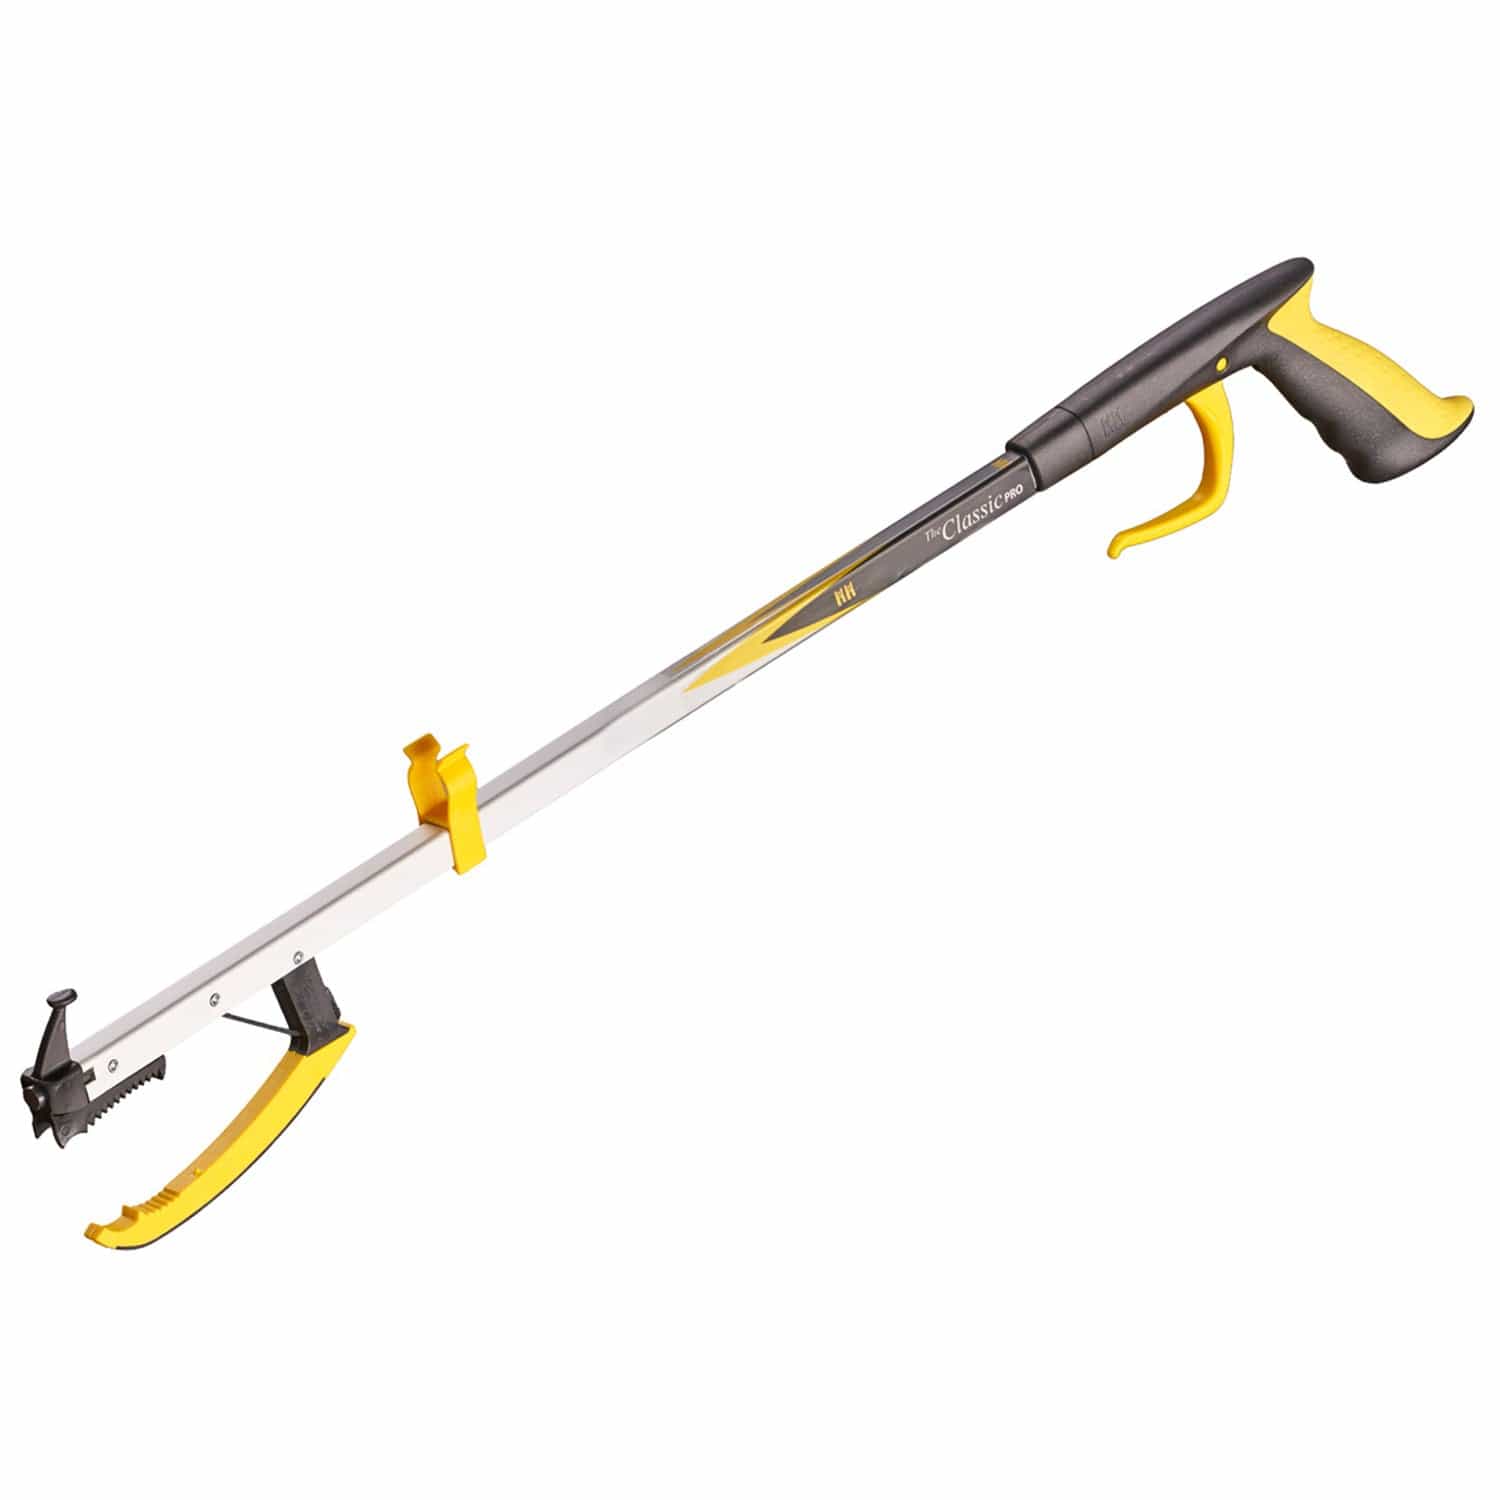 The Helping Hand Company daily living aids Standard - 26" Classic Pro Reacher